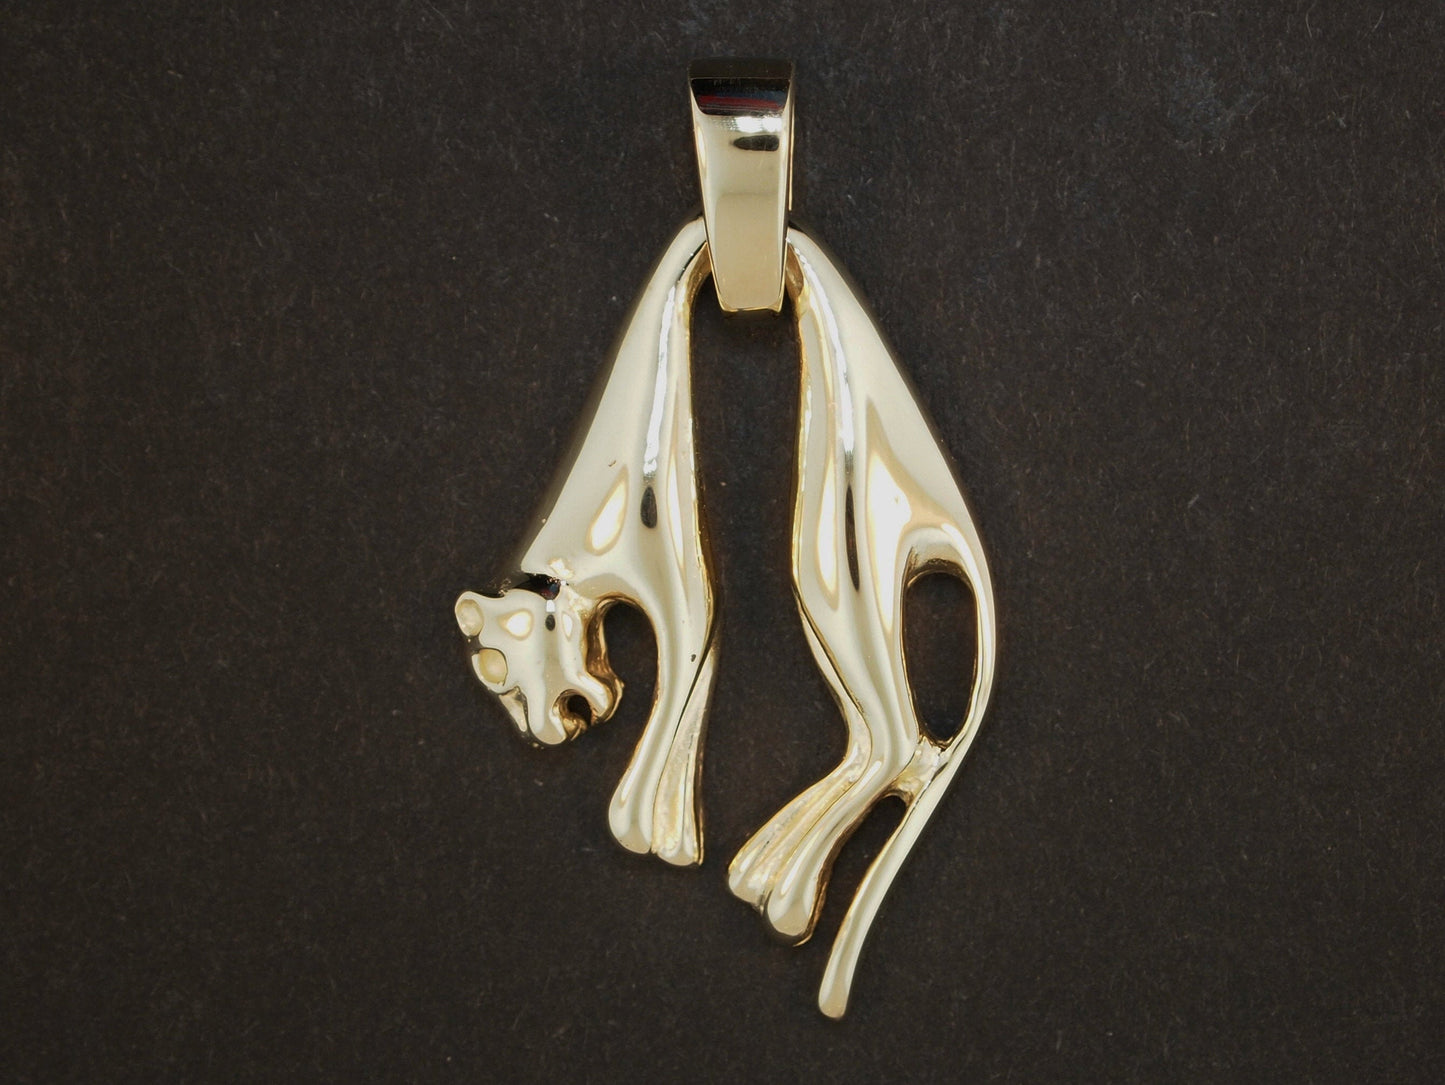 Hanging Cat Pendant in Sterling Silver or Antique Bronze